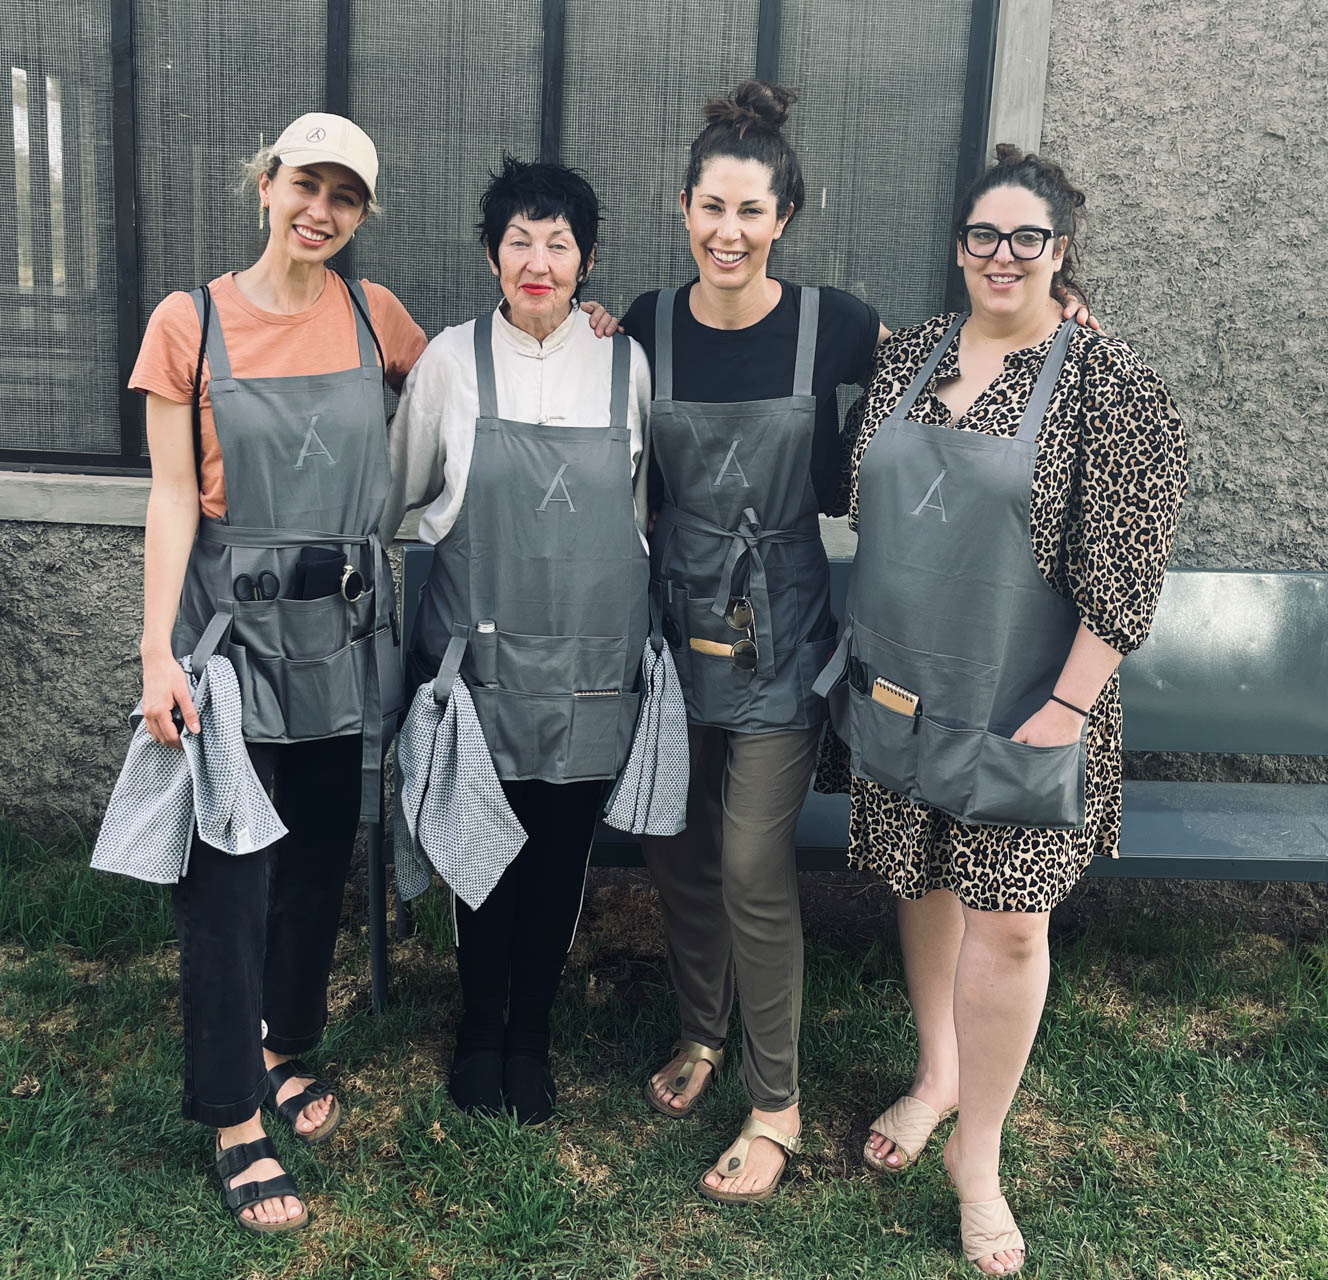 Claris, Annemarie, Alison and Eden, armed with aprons and cloths